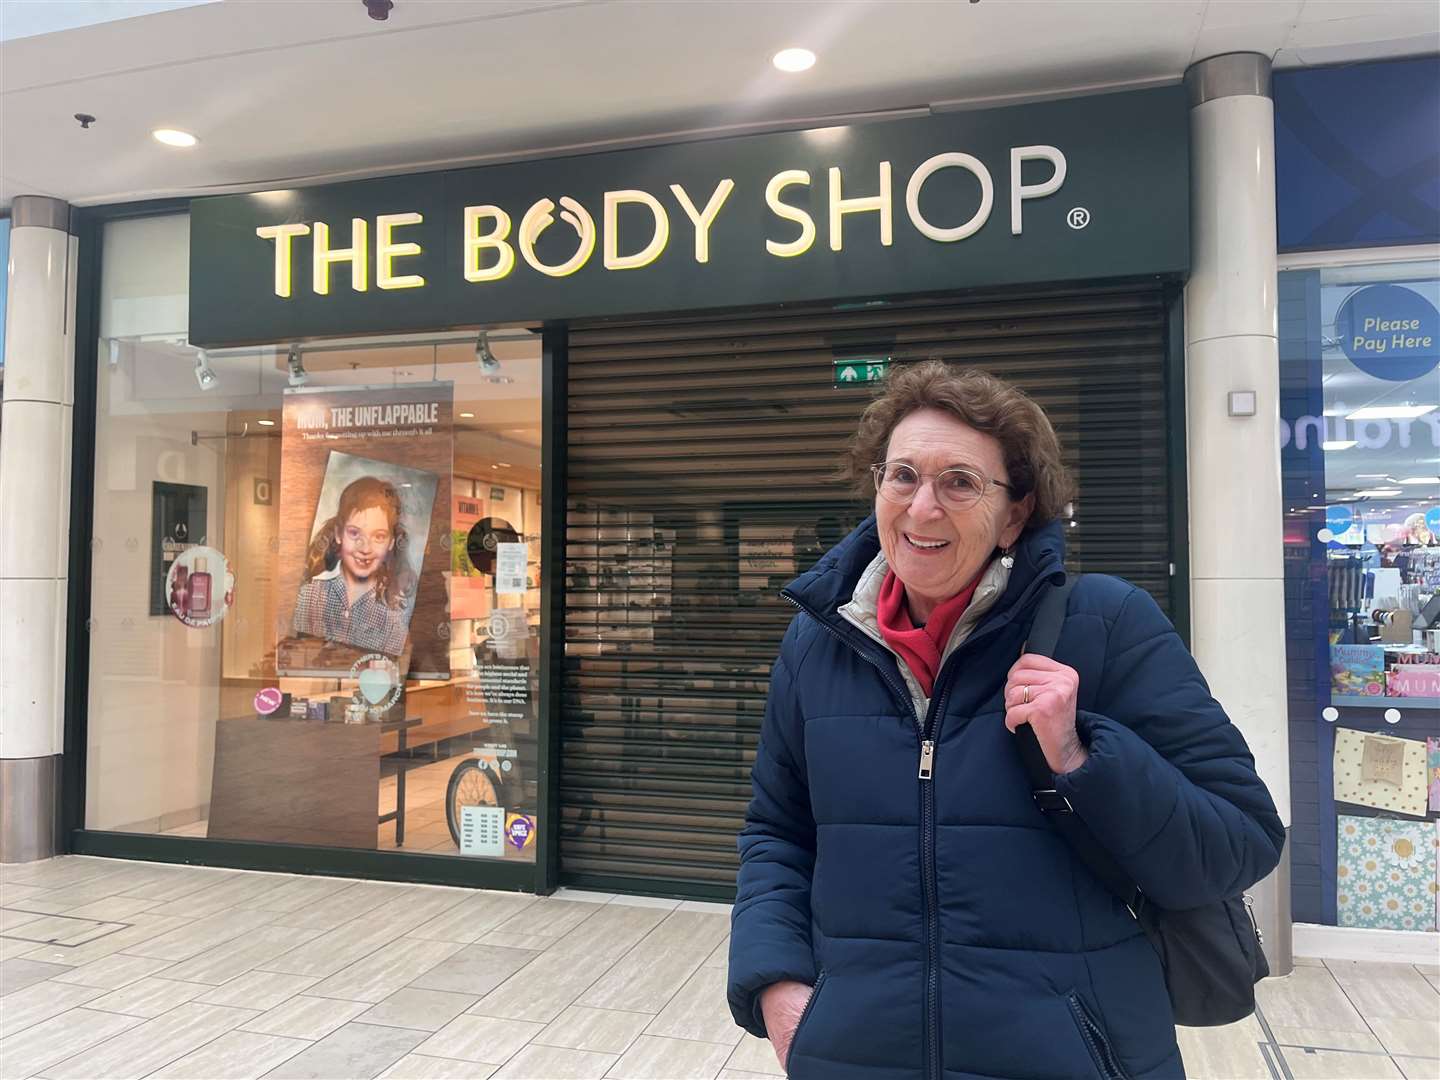 Liz said it's really sad to see the shop in County Square Shopping Centre close